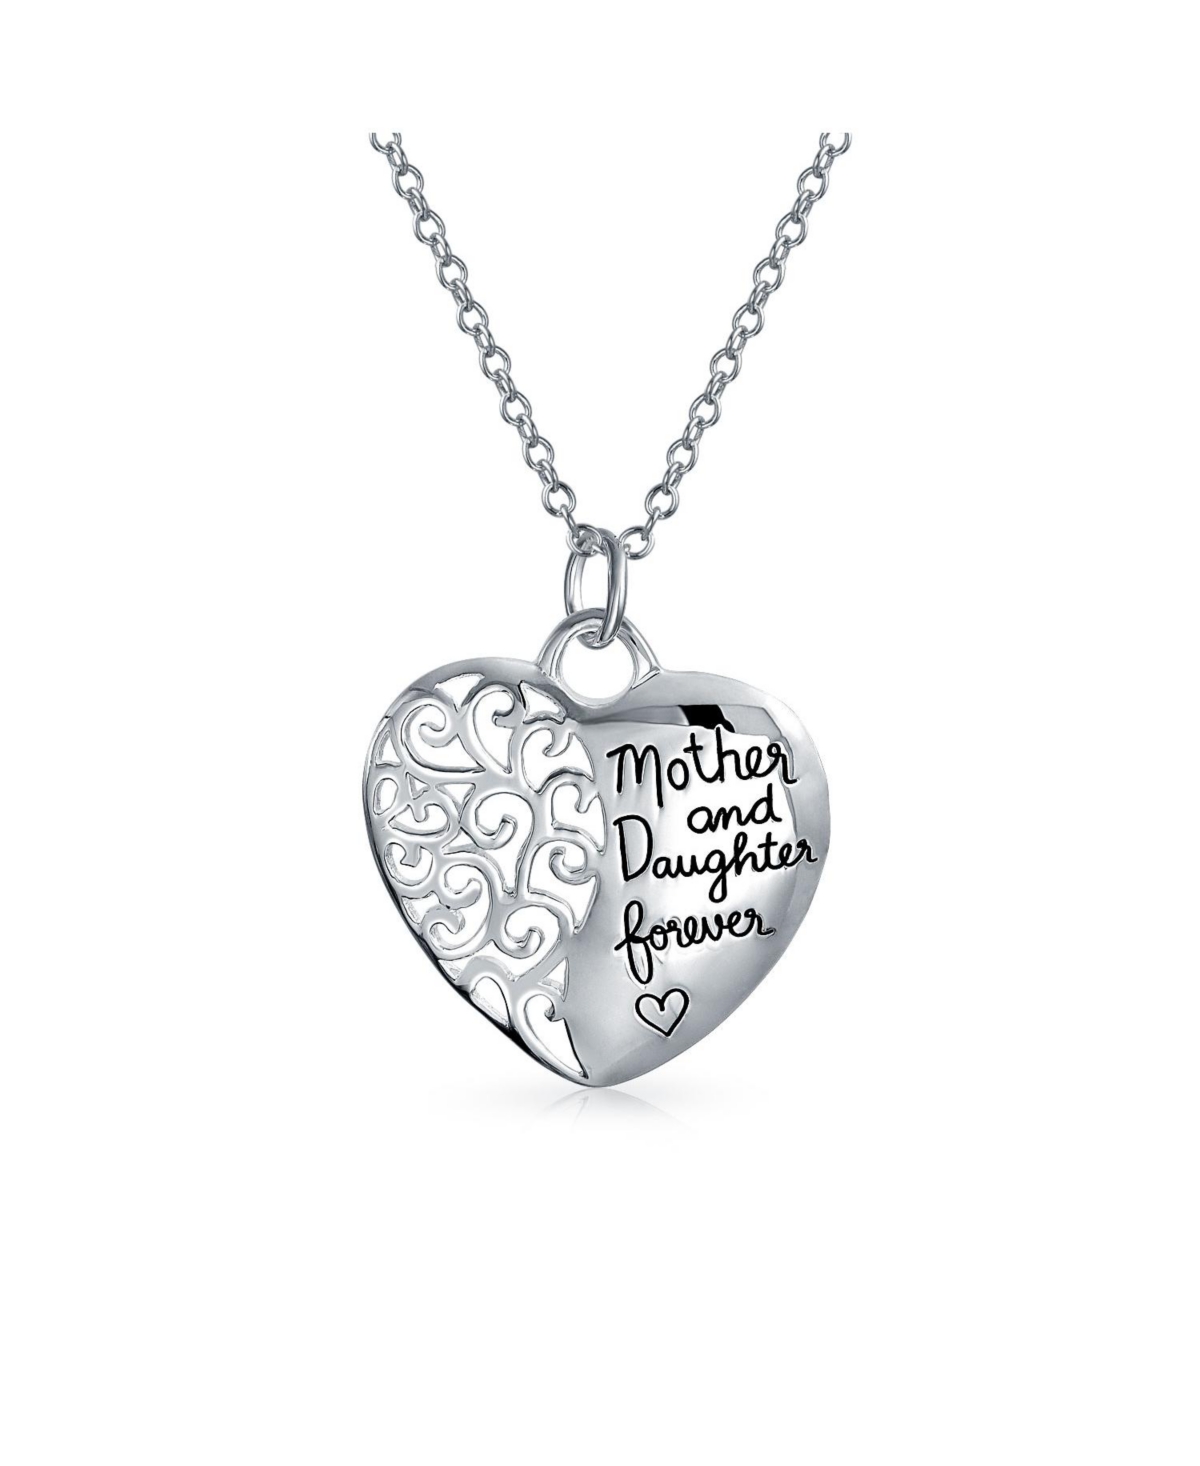 Personalized Scroll Heart Shape Inspirational Word Saying Mother Daughter Forever Heart Pendant Necklace For Women Mother Sterling Silve